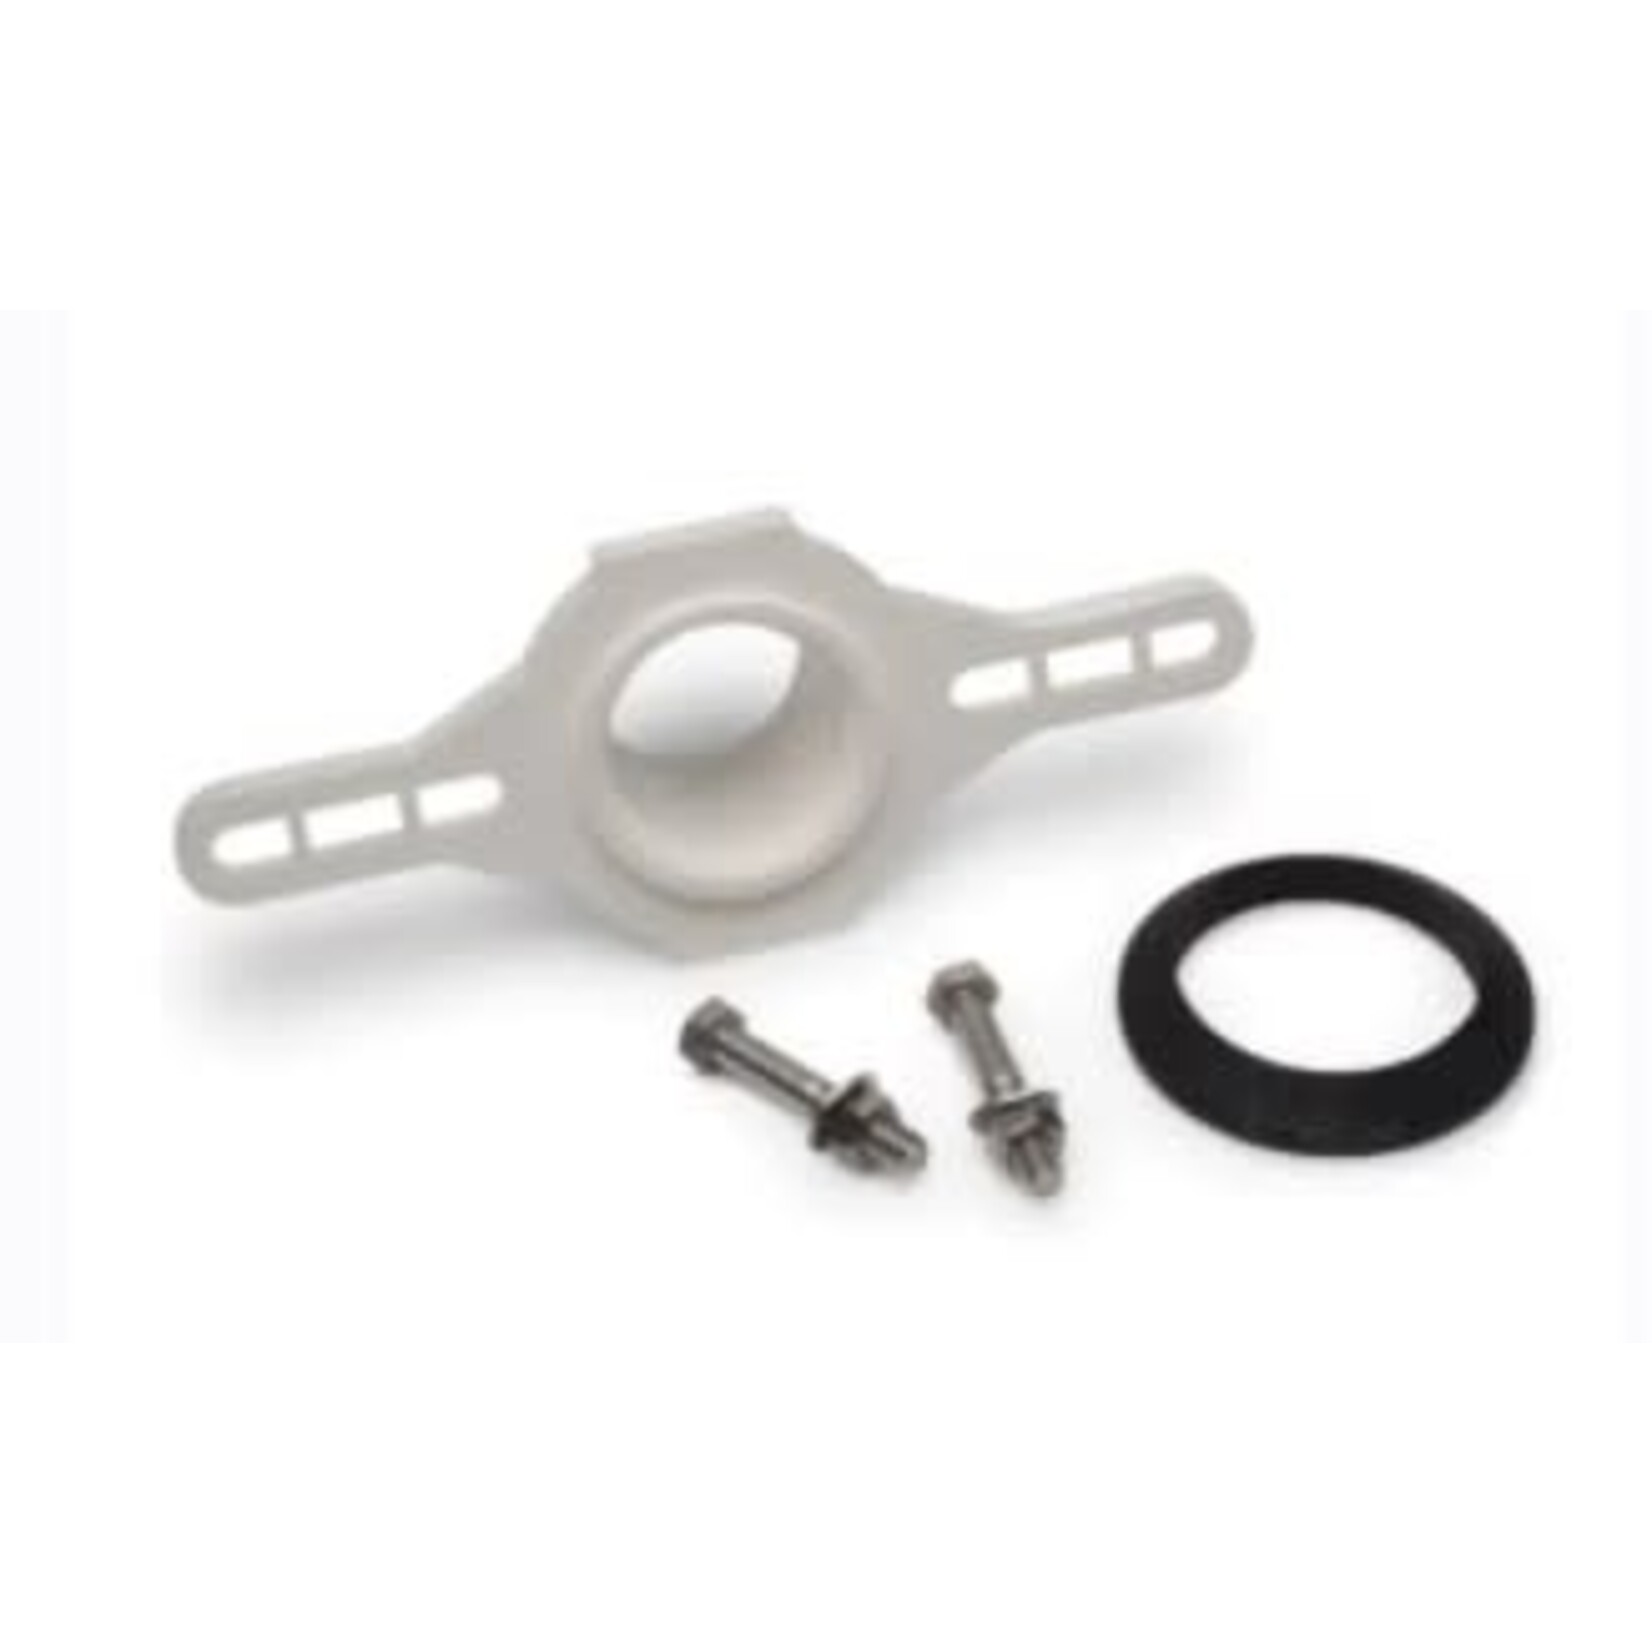 SIOUX CHIEF SIOUX CHIEF PVC URINAL FLANGE KIT